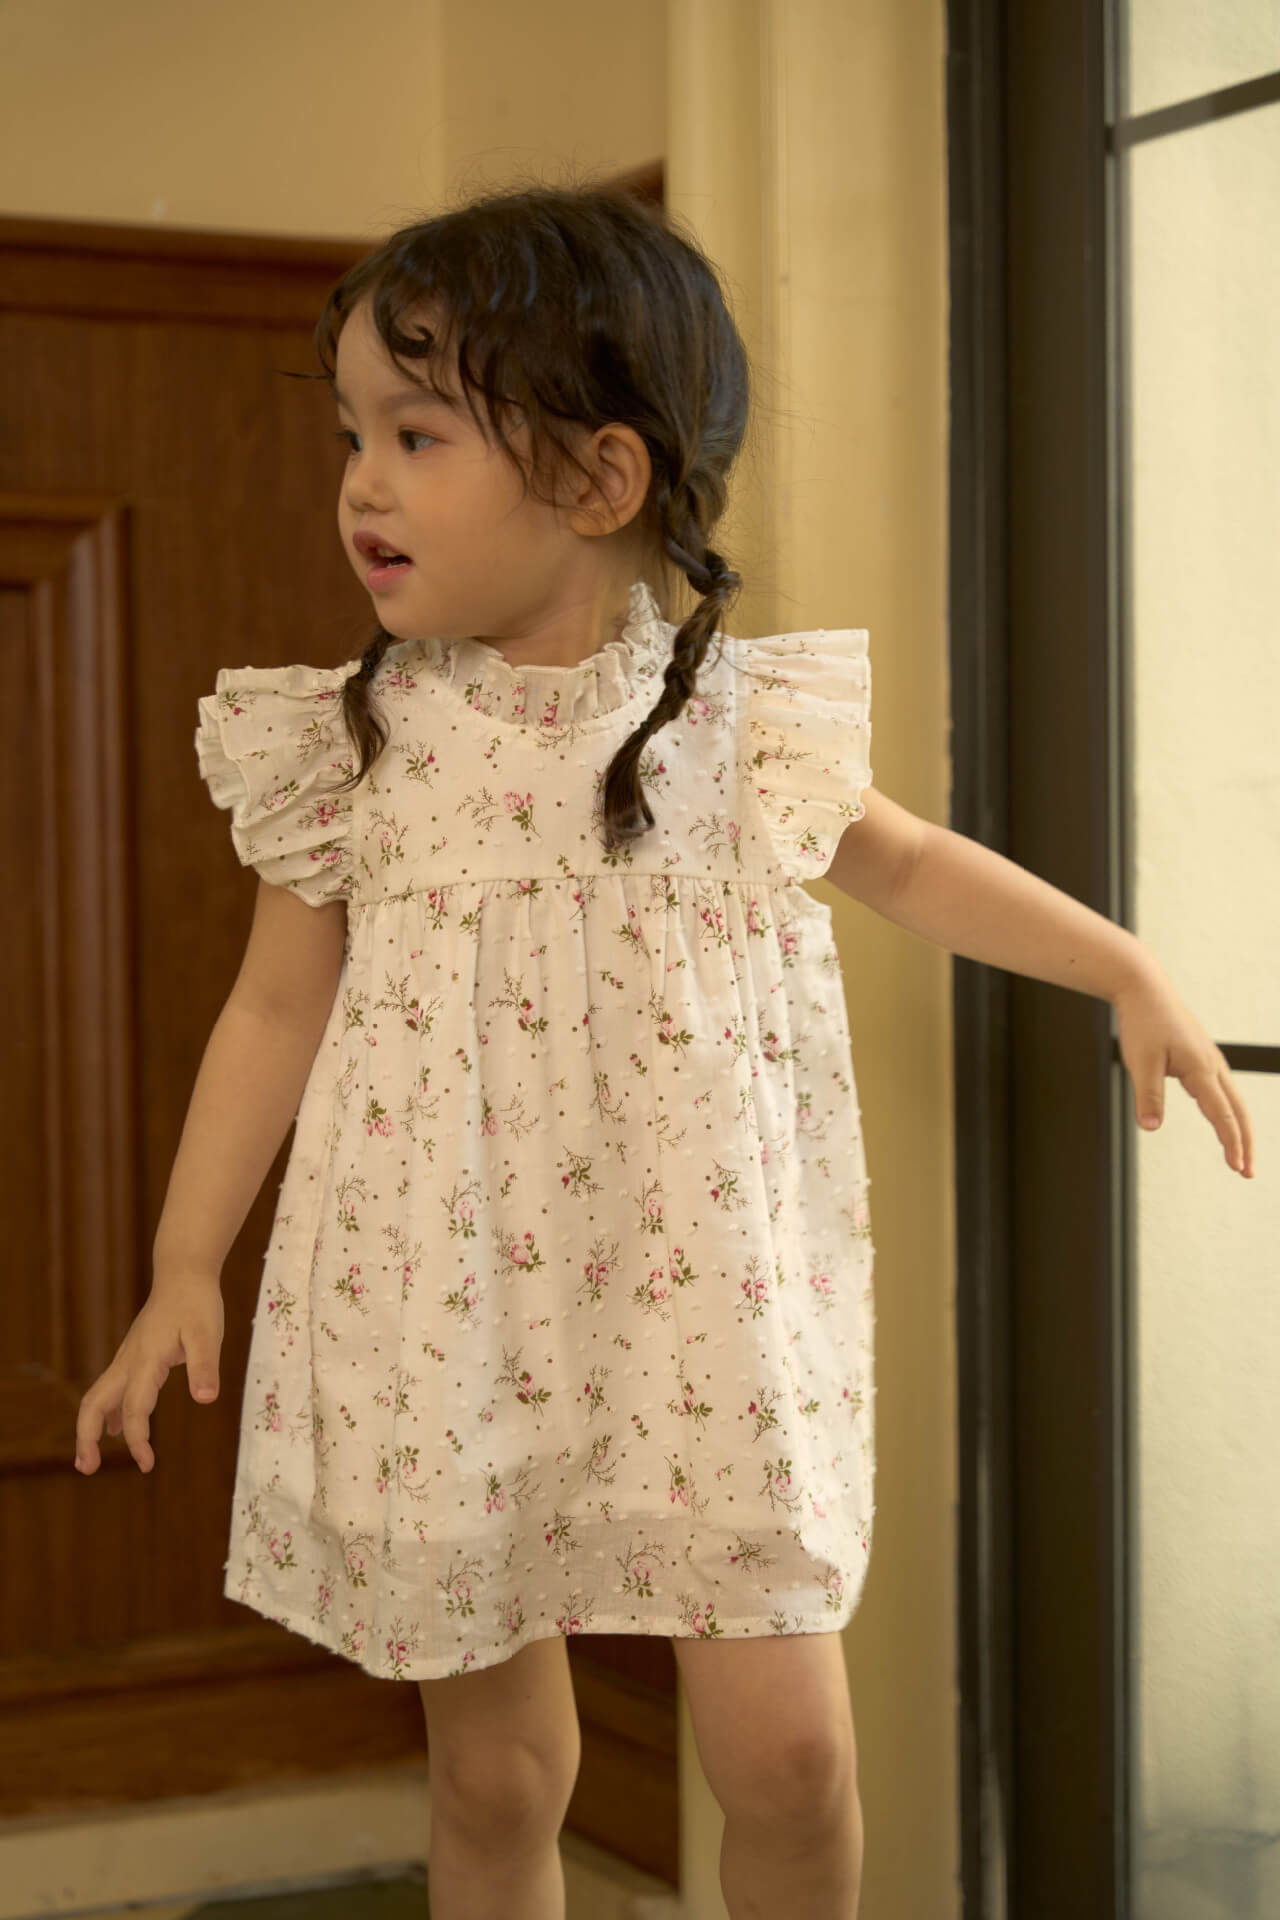 Cute Floral A-Line Dress, 12M to 6T.